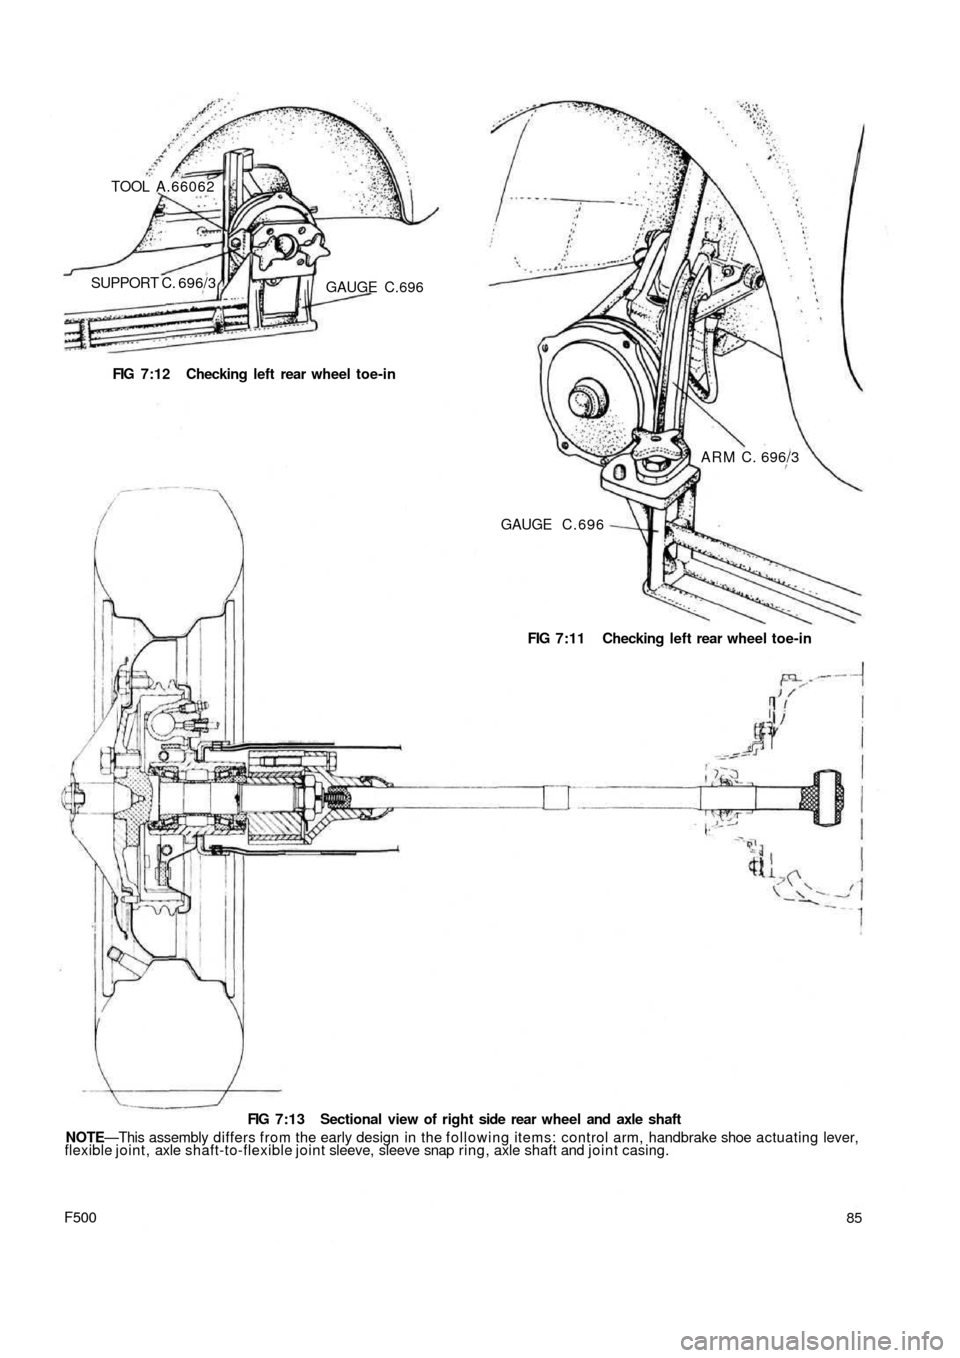 FIAT 500 1969 1.G Workshop Manual TOOL A.66062
SUPPORT C. 696/3GAUGE C.696
FIG 7:12 Checking left rear wheel toe-in
ARM C. 696/3
GAUGE C . 6 9 6
FIG 7:11 Checking left rear wheel toe-in
F500
FIG 7:13 Sectional view of right side rear 